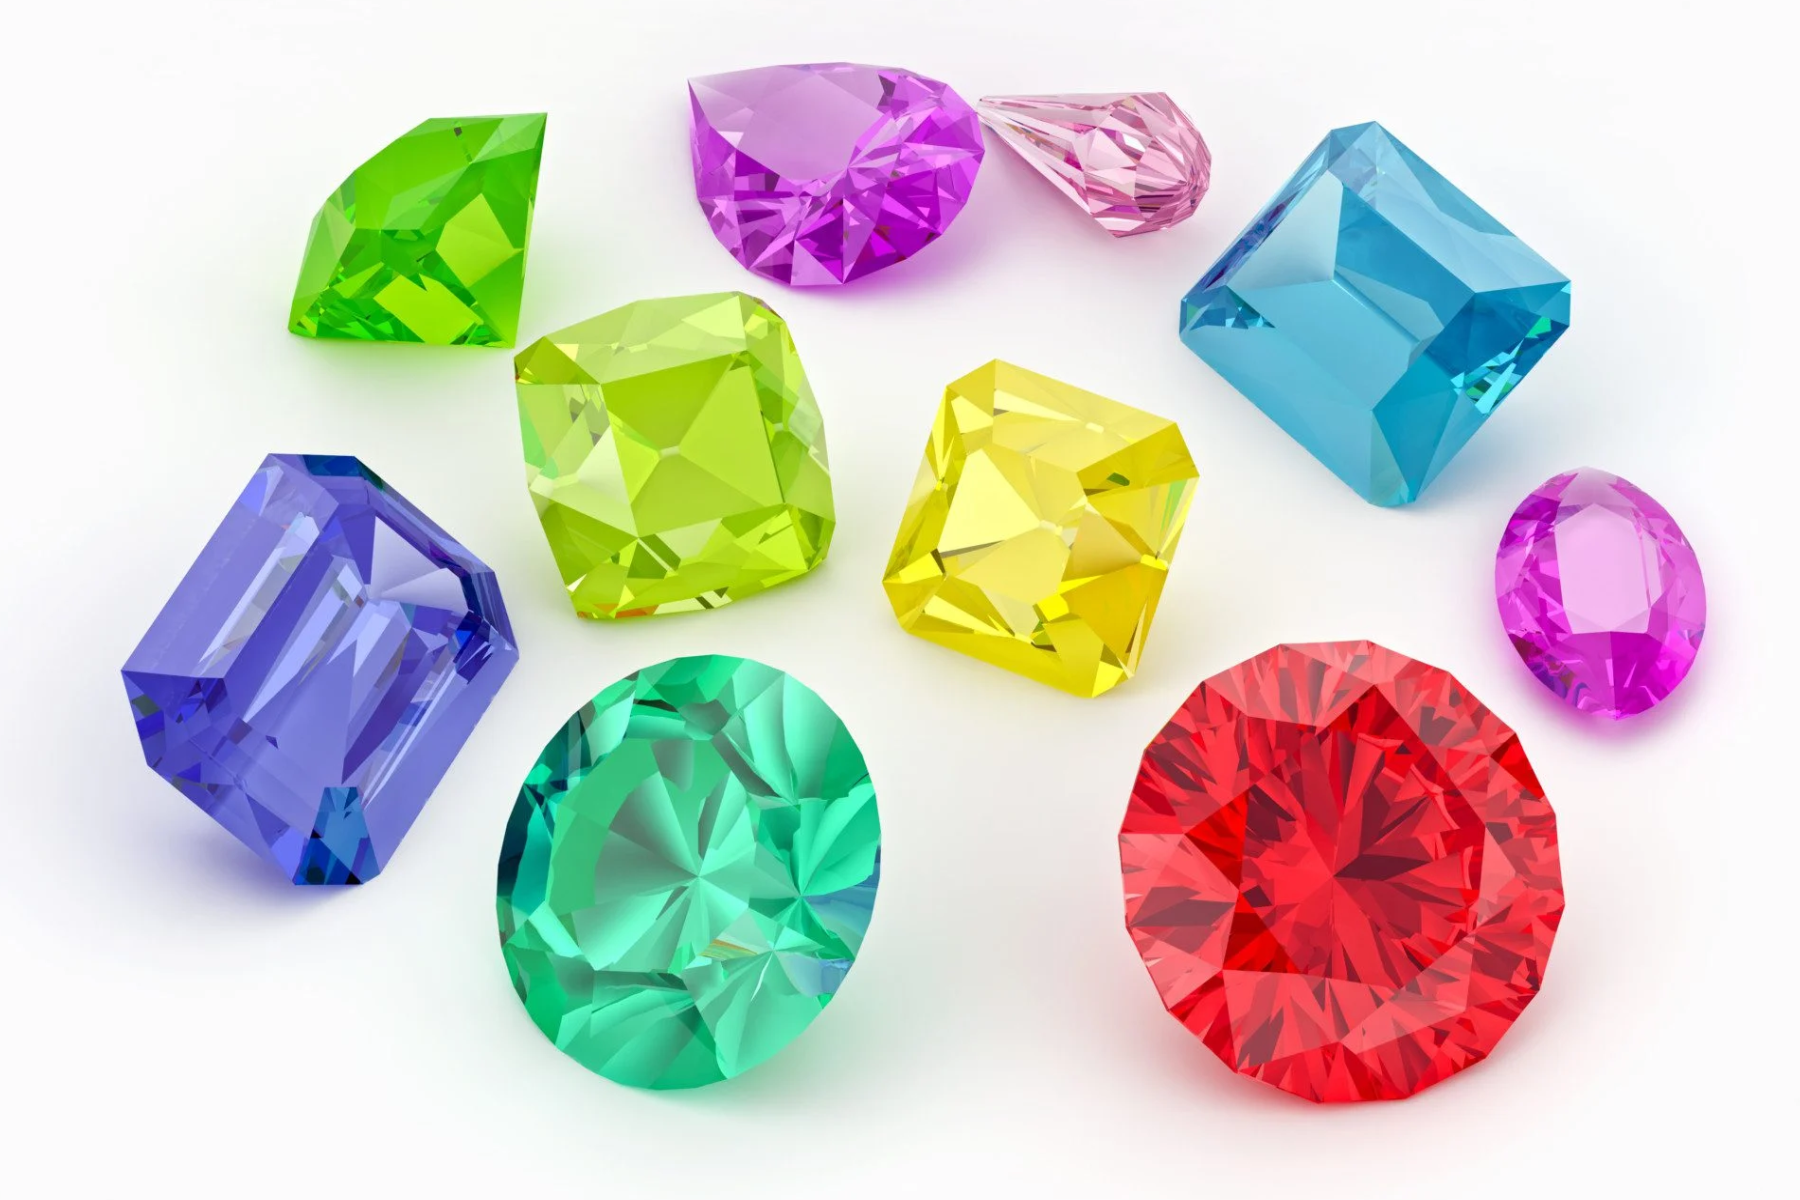 A group of gemstones